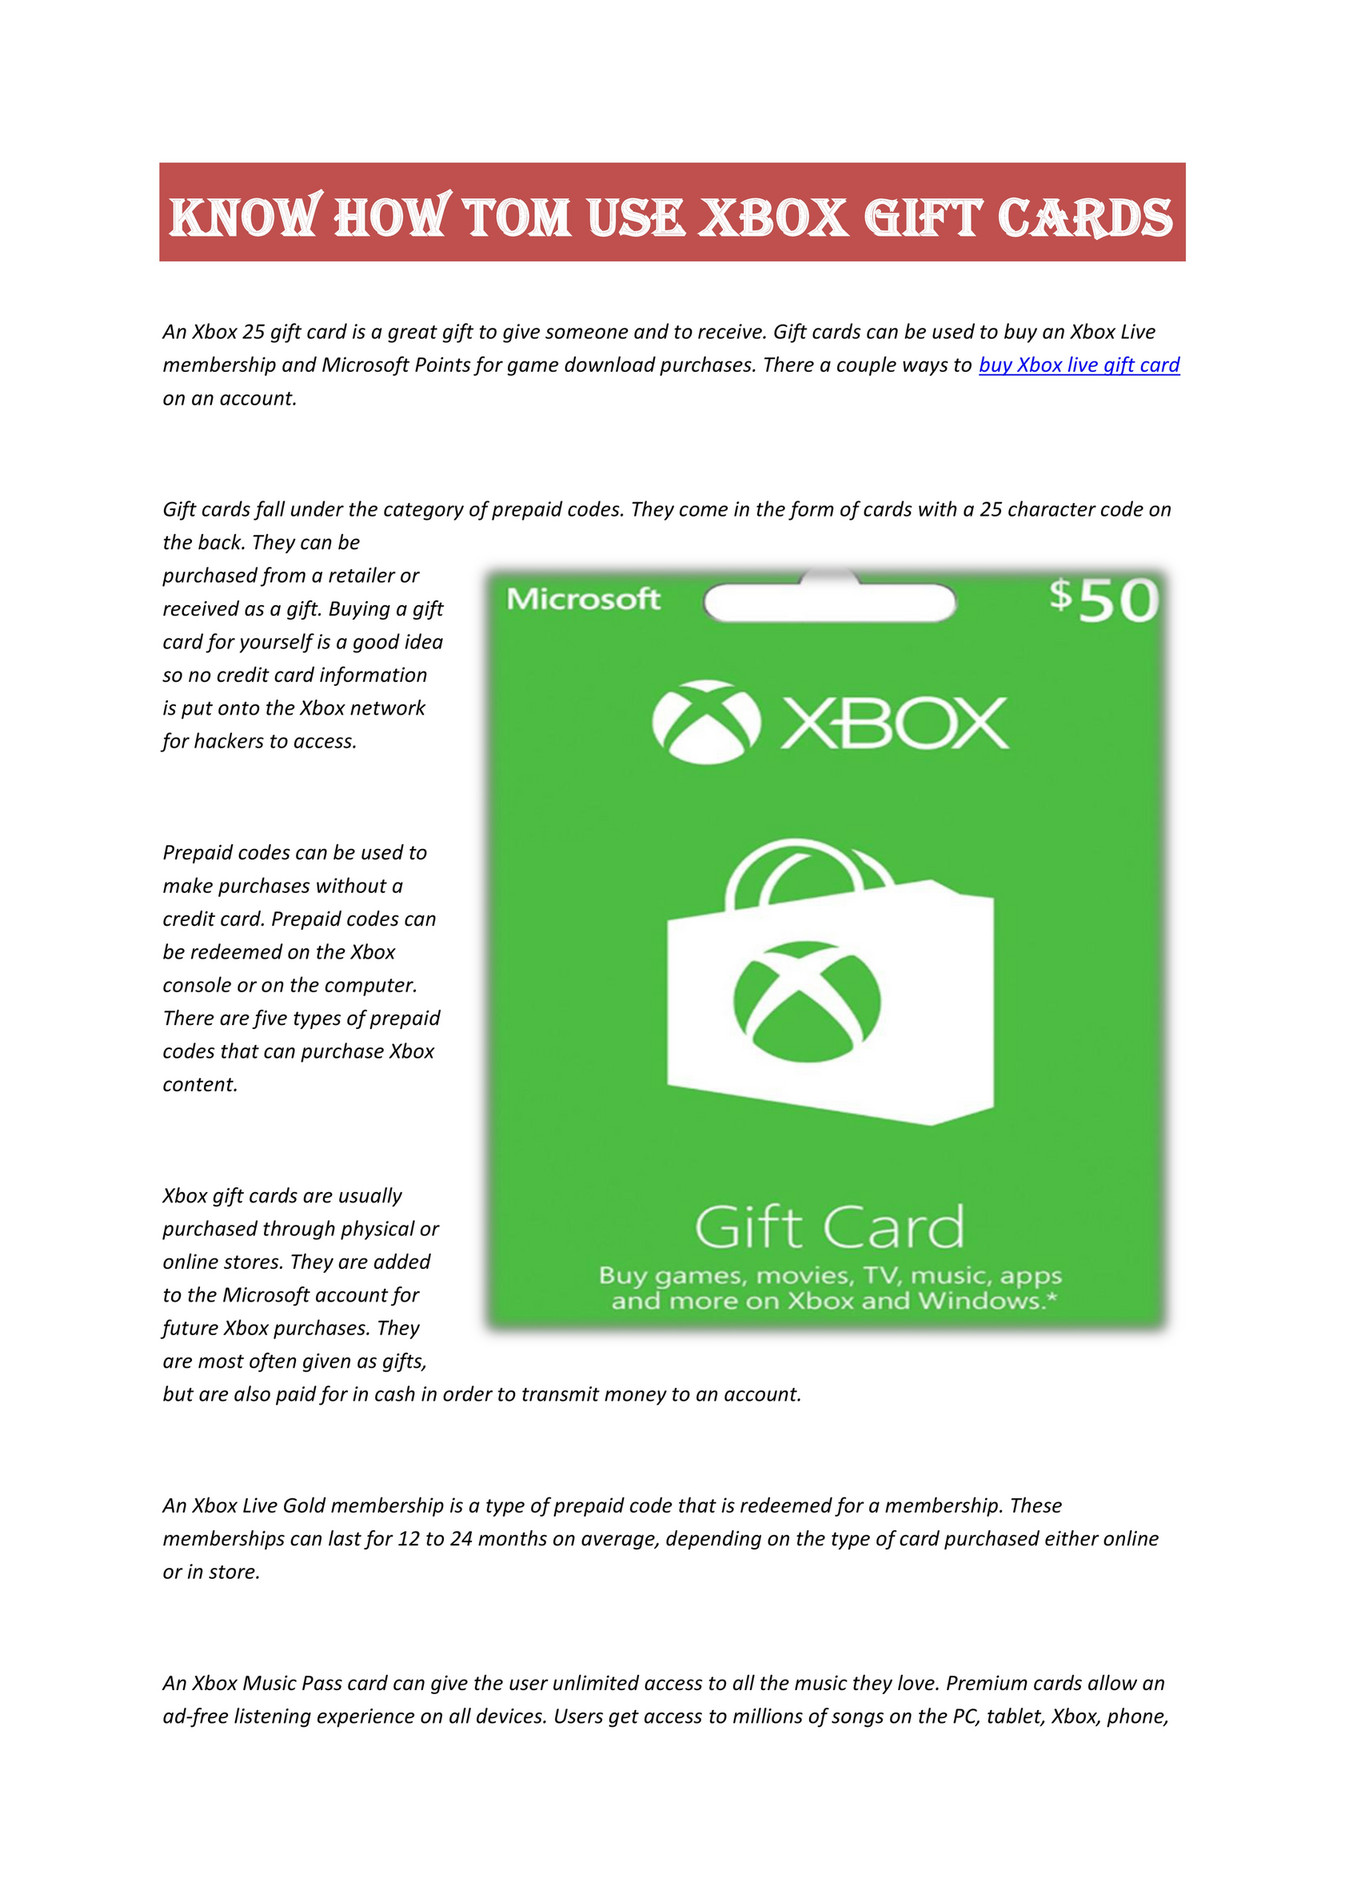 can i buy an xbox gift card online